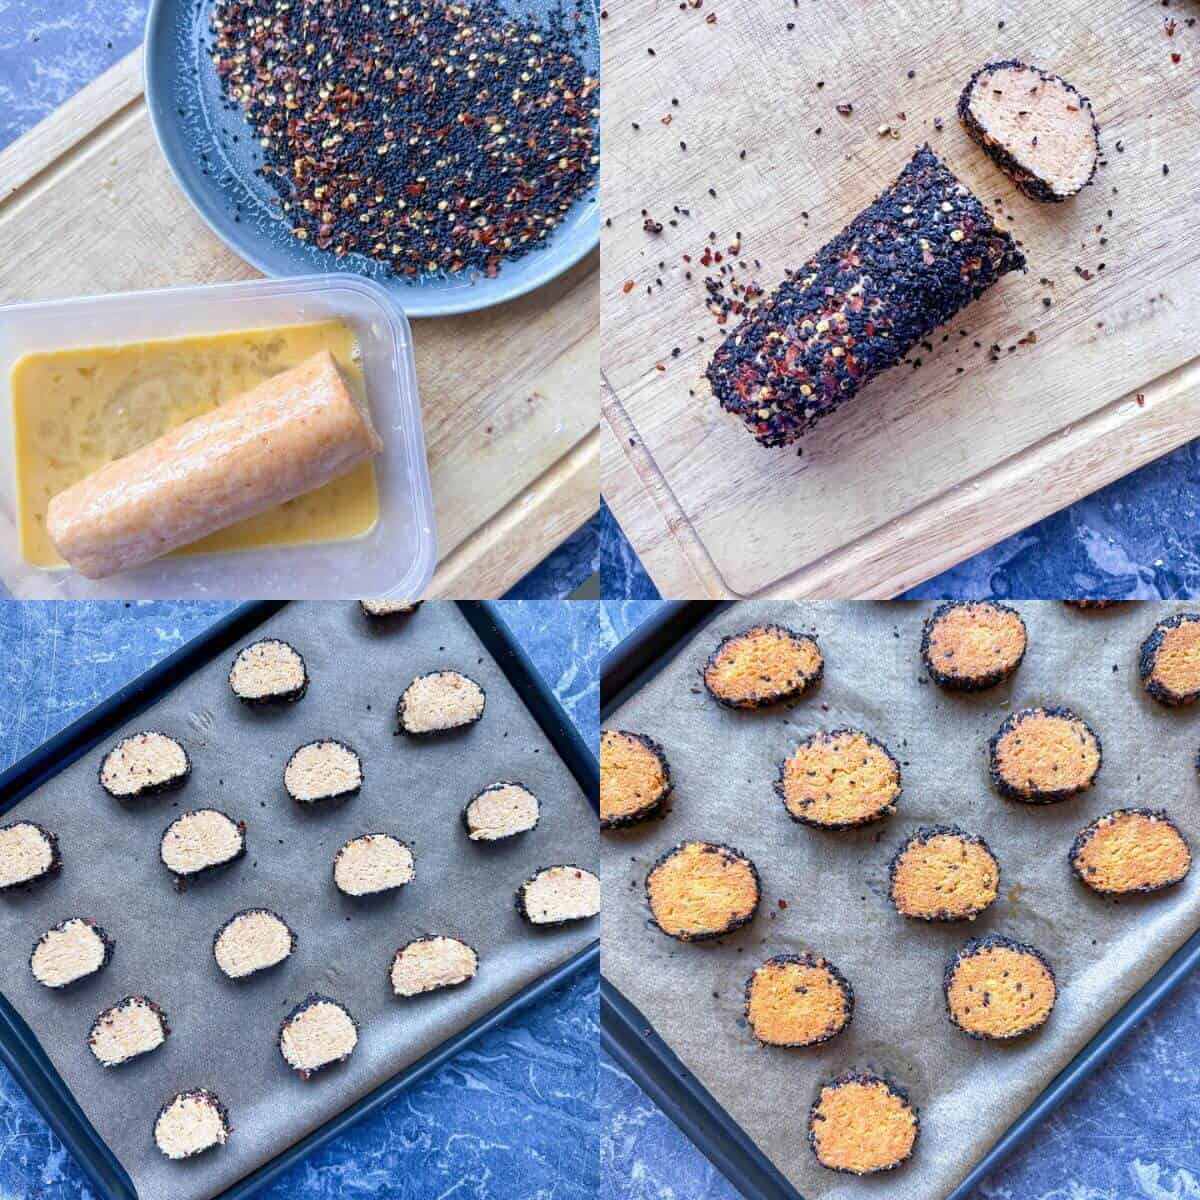 Process image showing how to coat the parmesan cheese cookie dough in seeds, slice up and bake. 